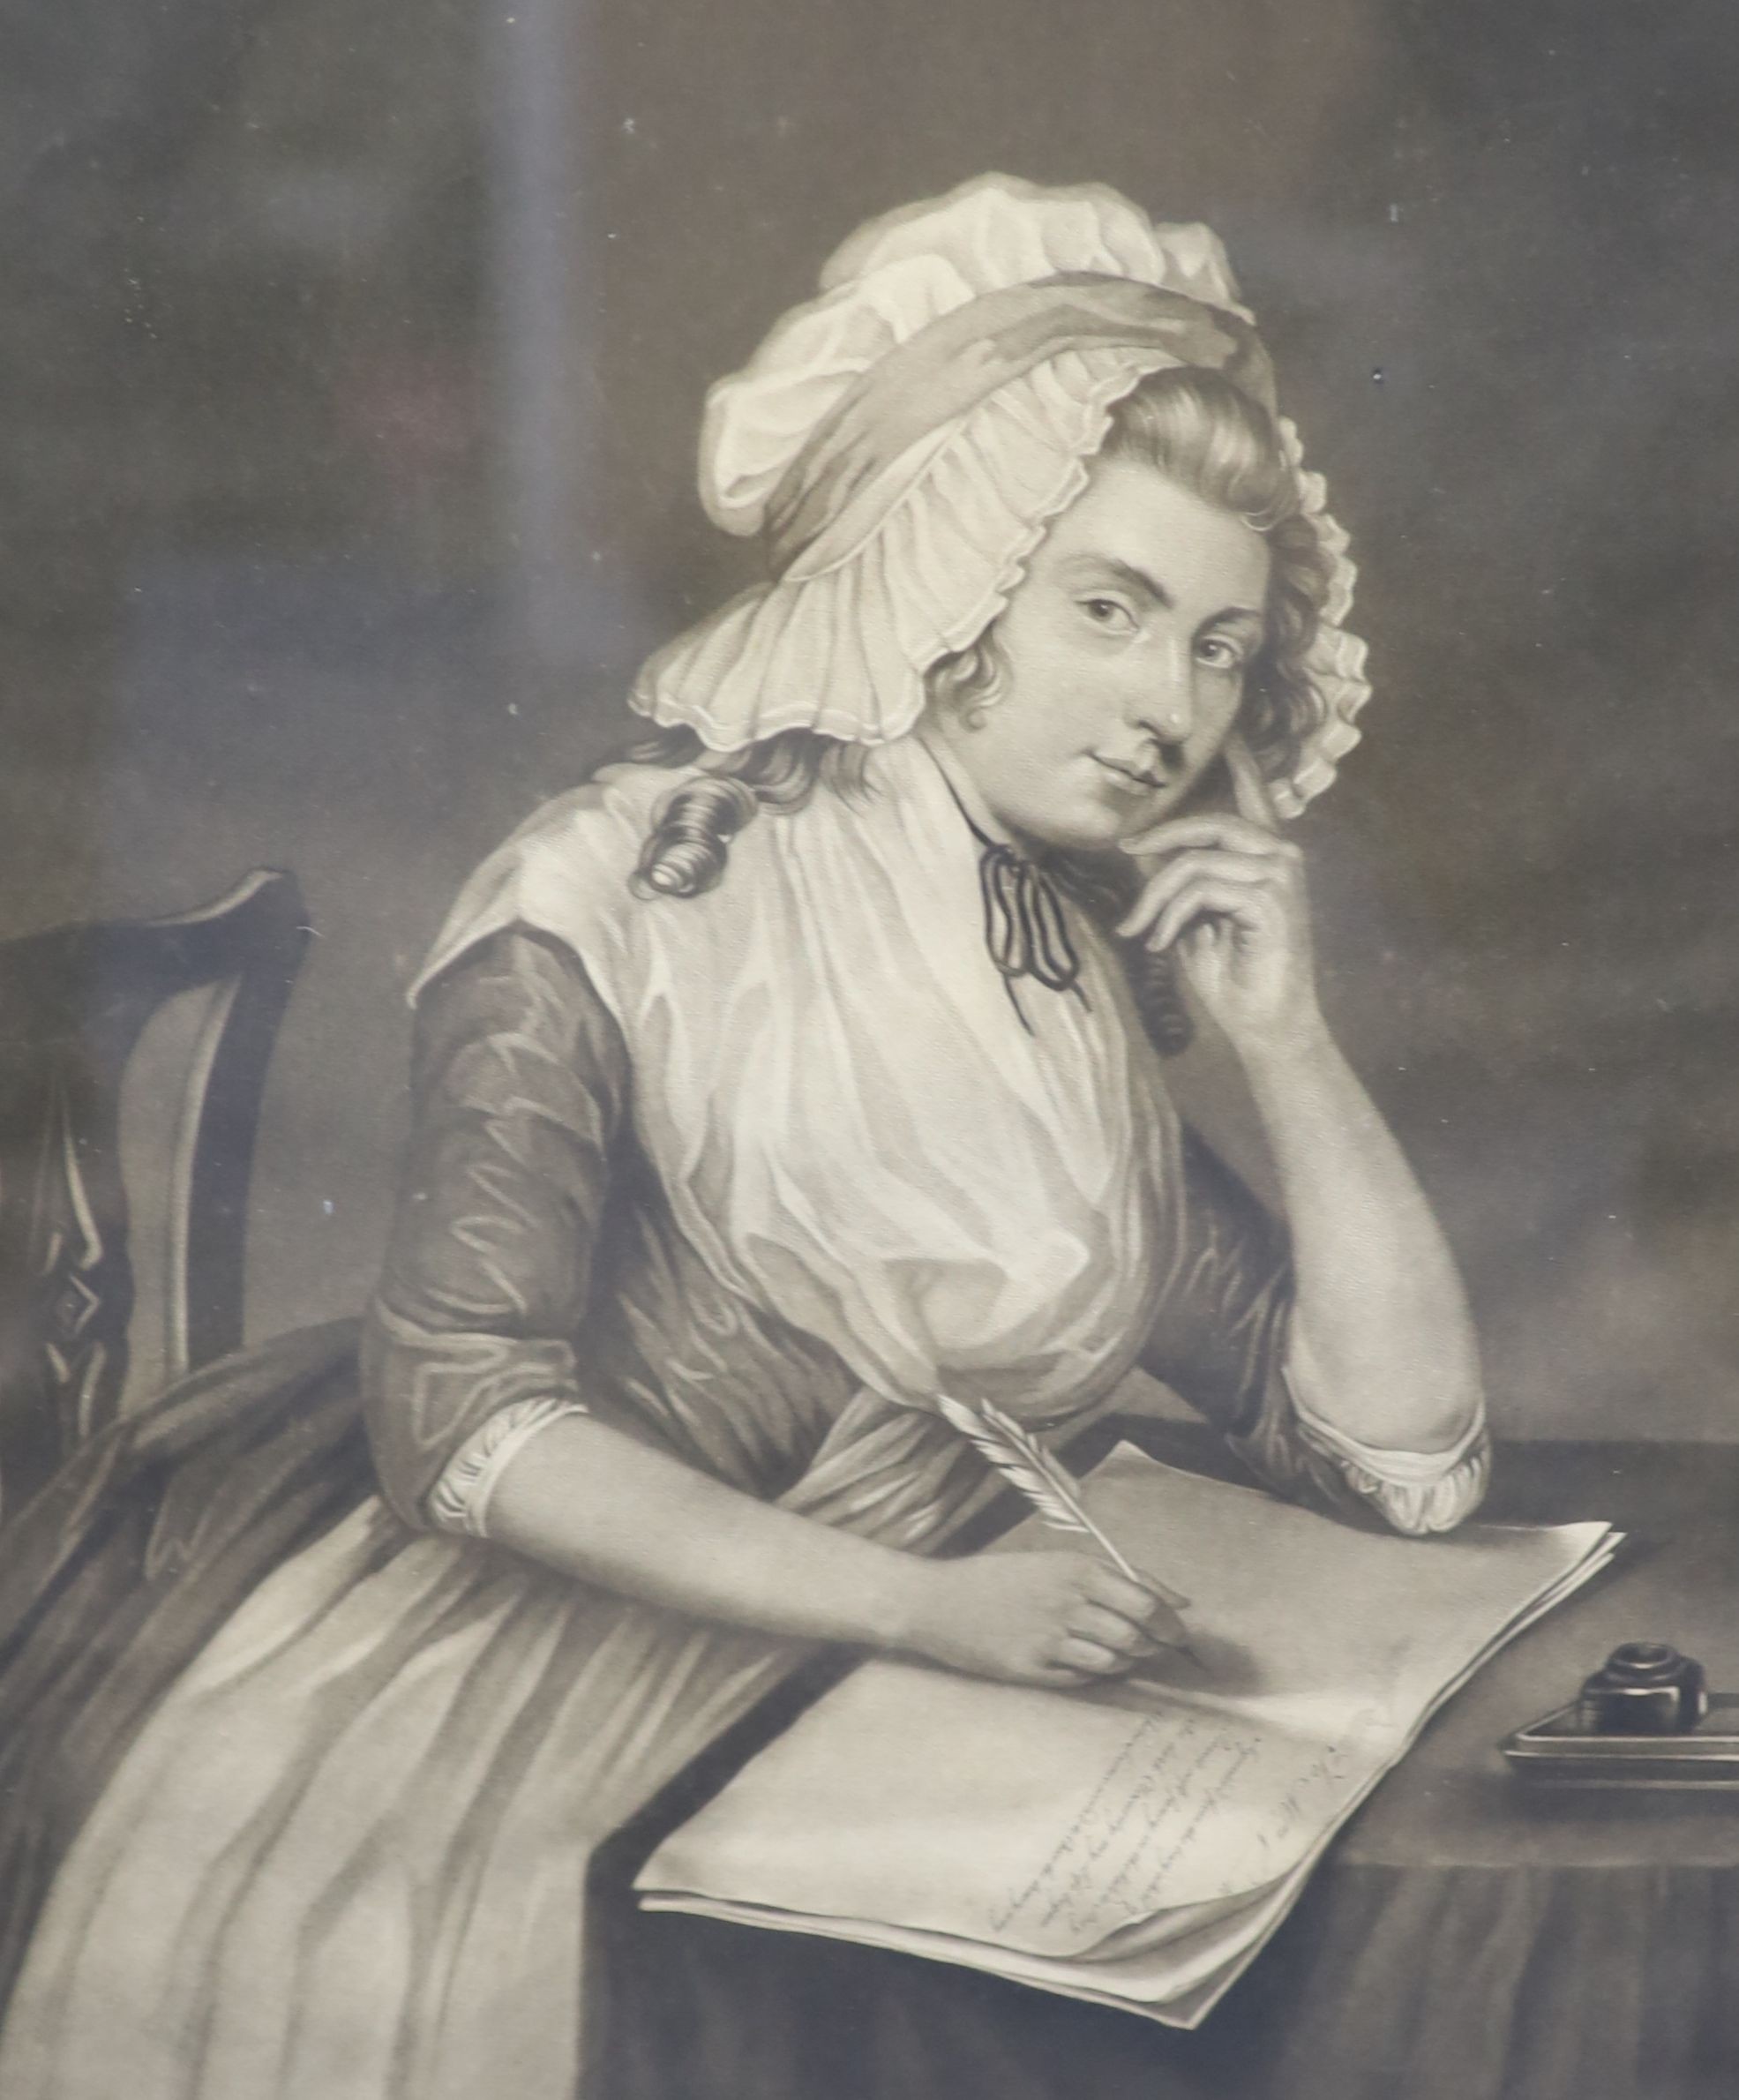 Shiells, Sarah. Ann Yearsley. The Bristol Milkwoman. Mezzotint, 445 x 325cm., engraved by Joseph Grozer. “Publish’d as the Act directs May 16th, 1787